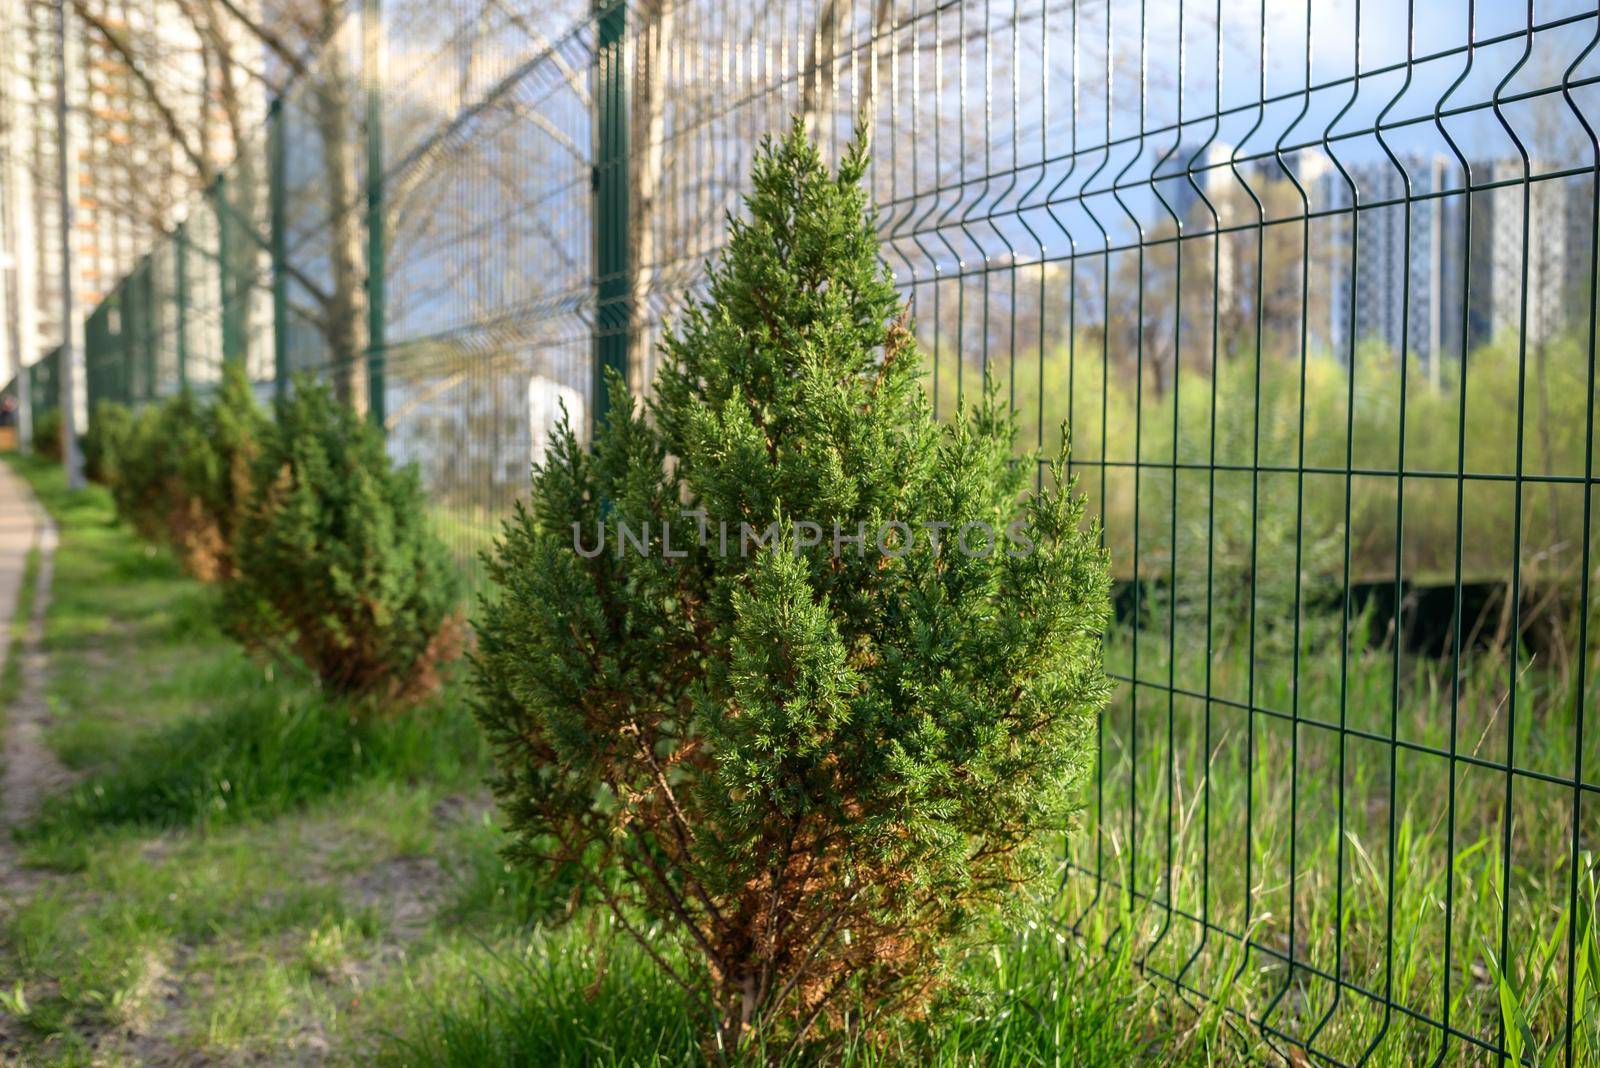 Skyrocket Junipers hedges as house green fence from street side by Kobysh